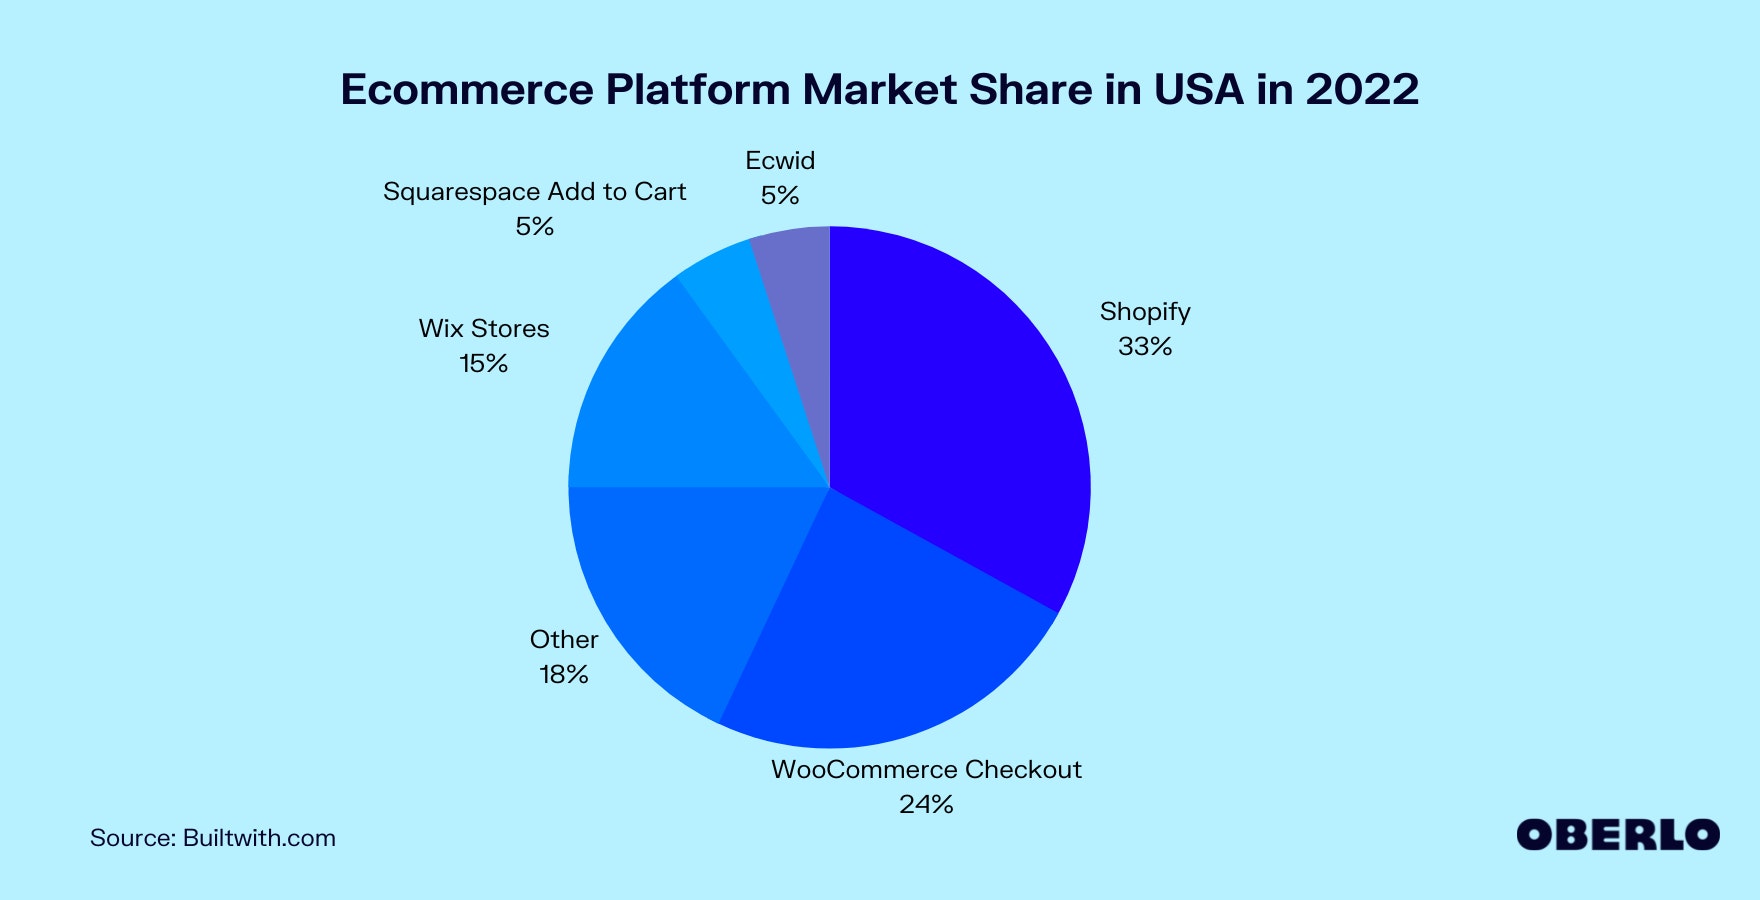 Chart of Ecommerce Platform Market Share in the USA